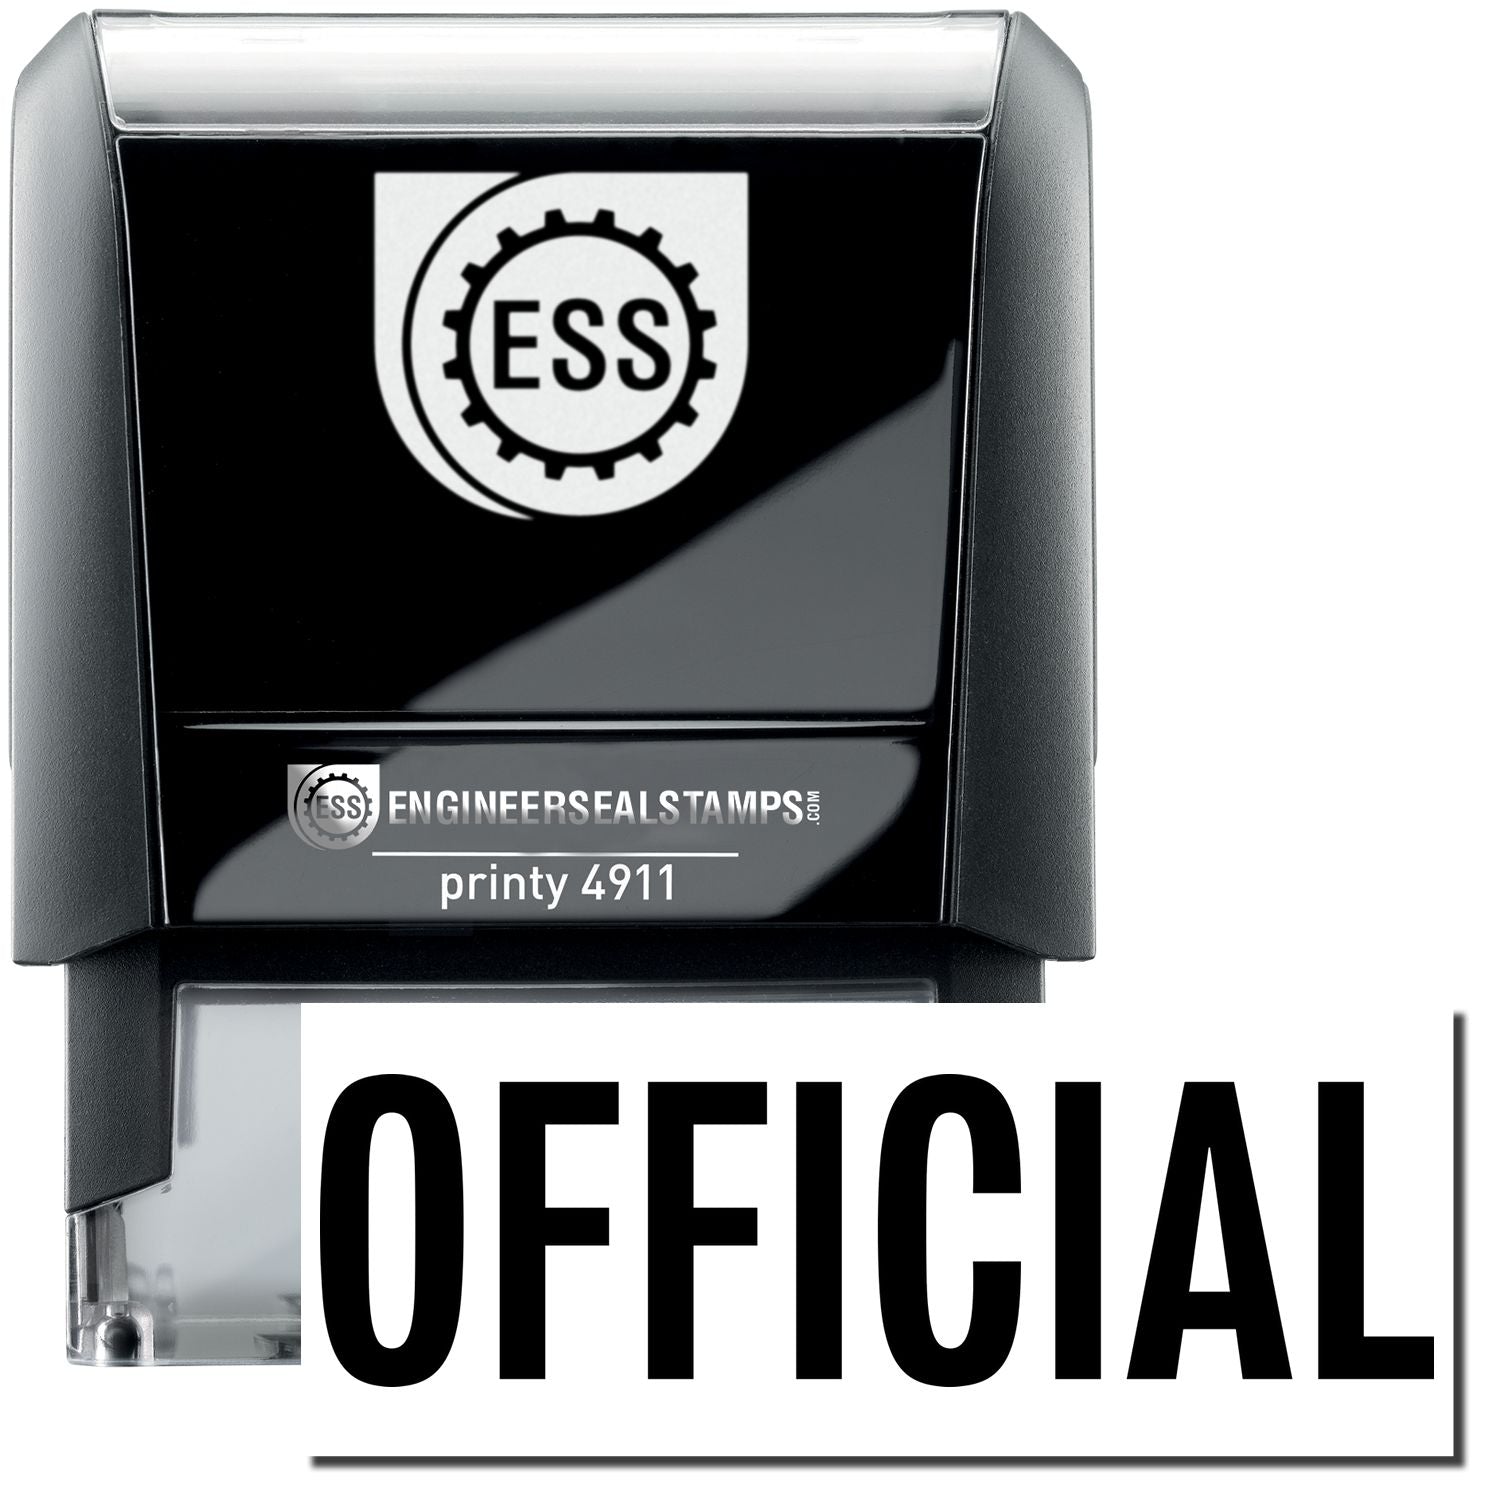 A self-inking stamp with a stamped image showing how the text "OFFICIAL" is displayed after stamping.